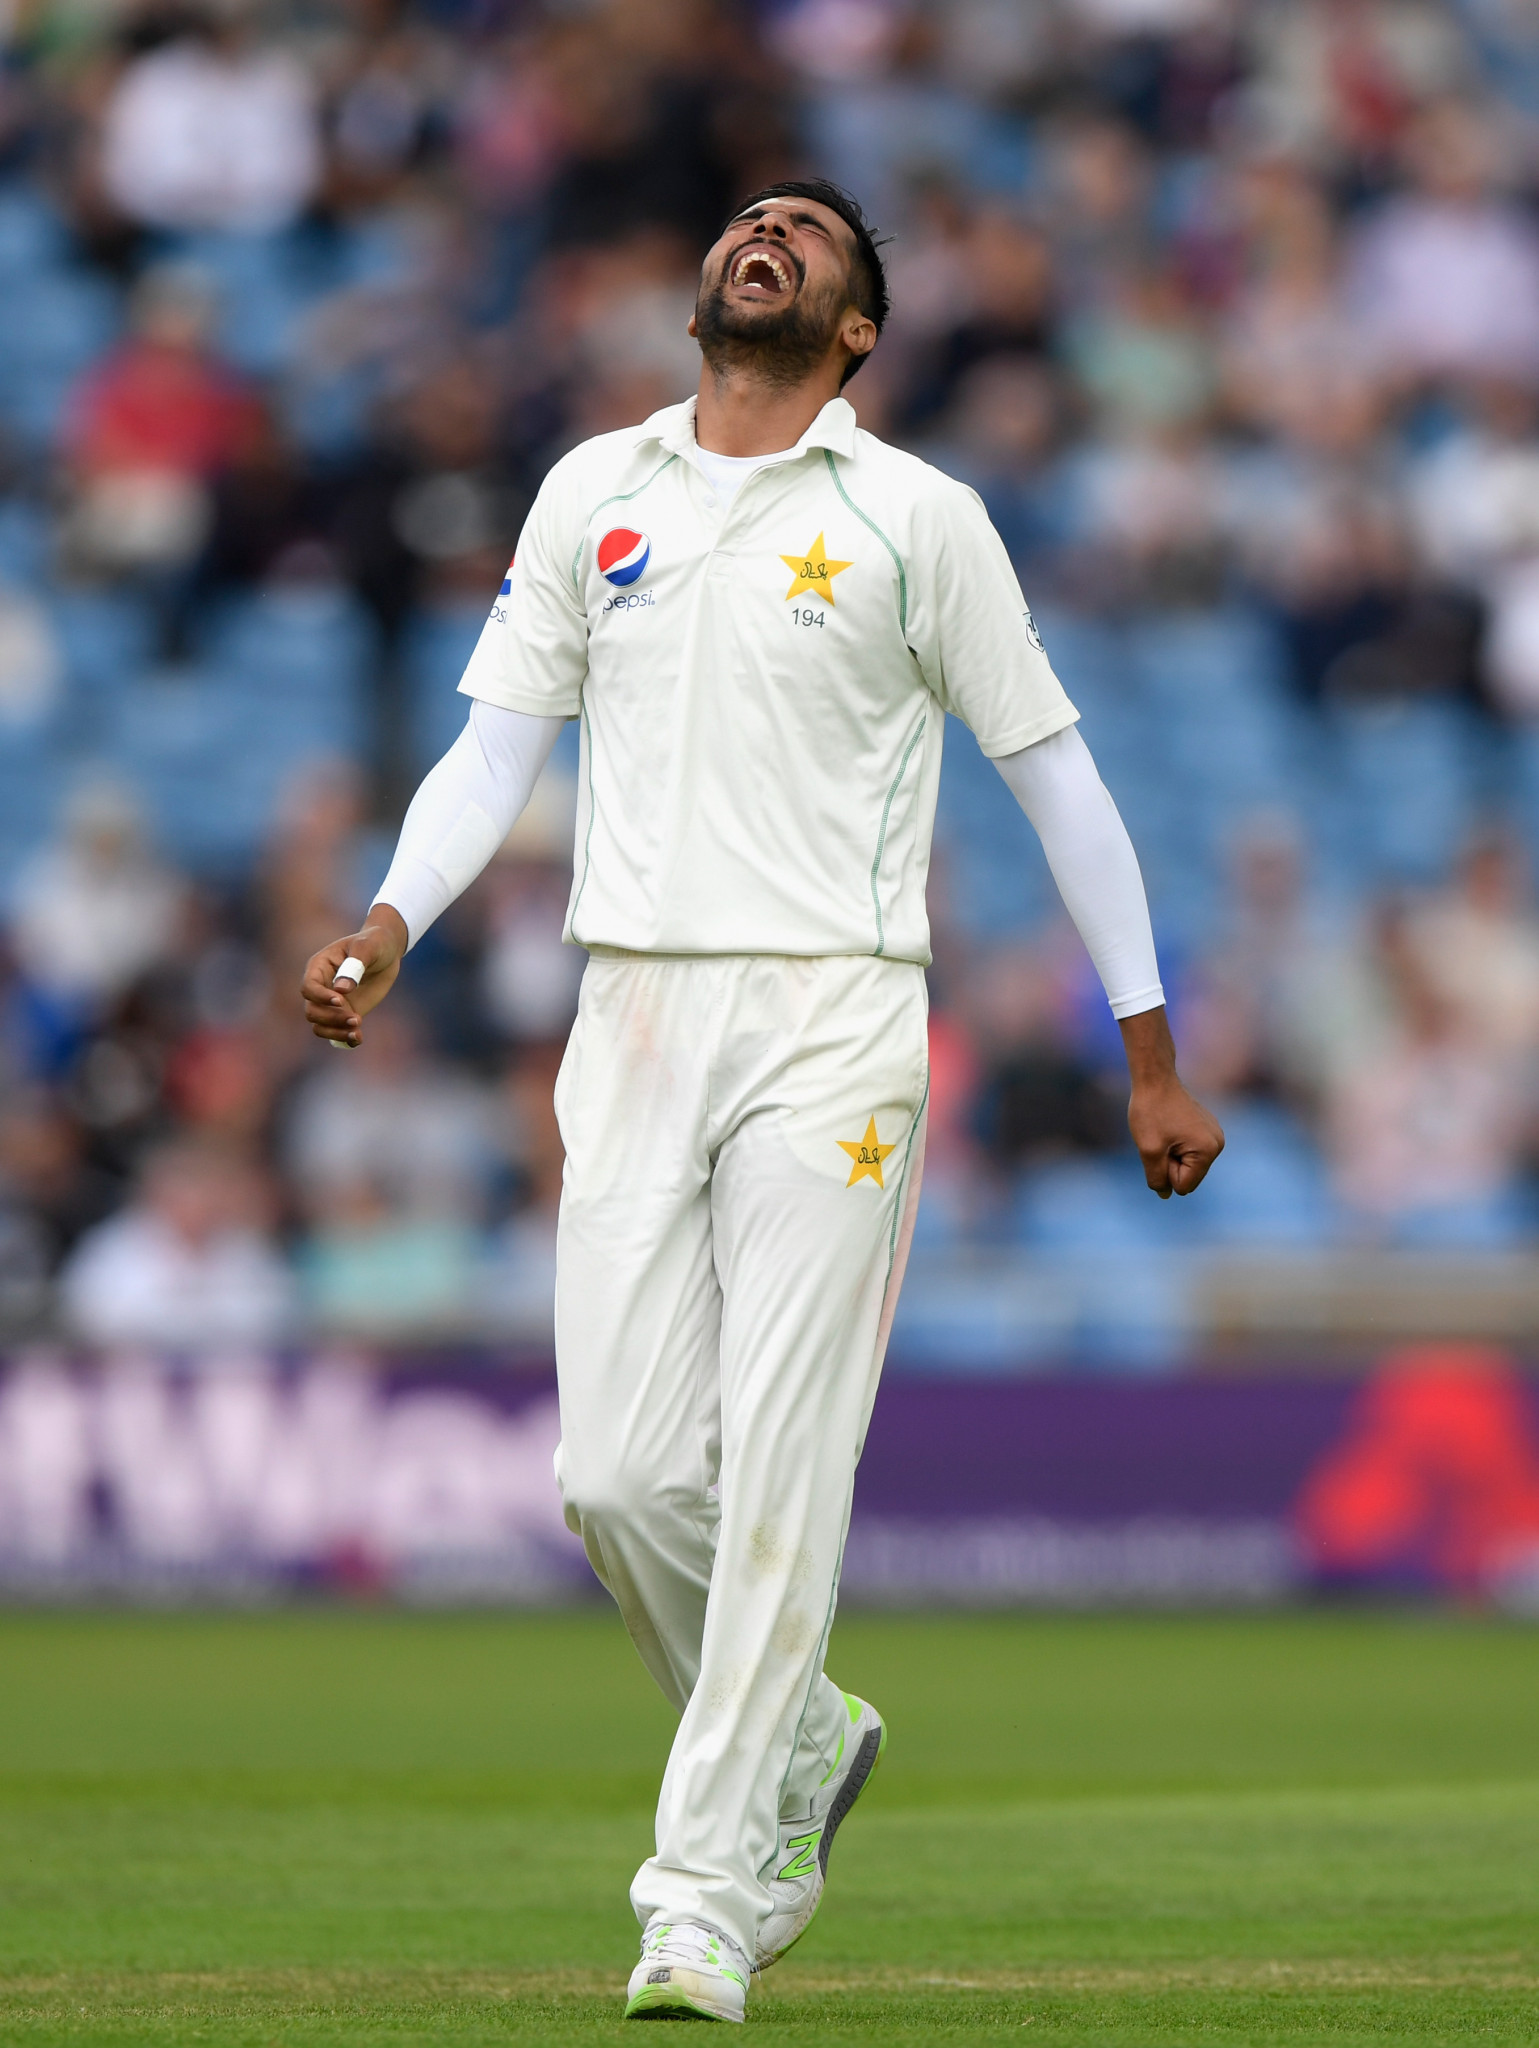 Pakistan's Mohammad Amir pleaded guilty to match fixing during a test at Lord's in 2011 and was given a six month jail term under UK law ©Getty Images